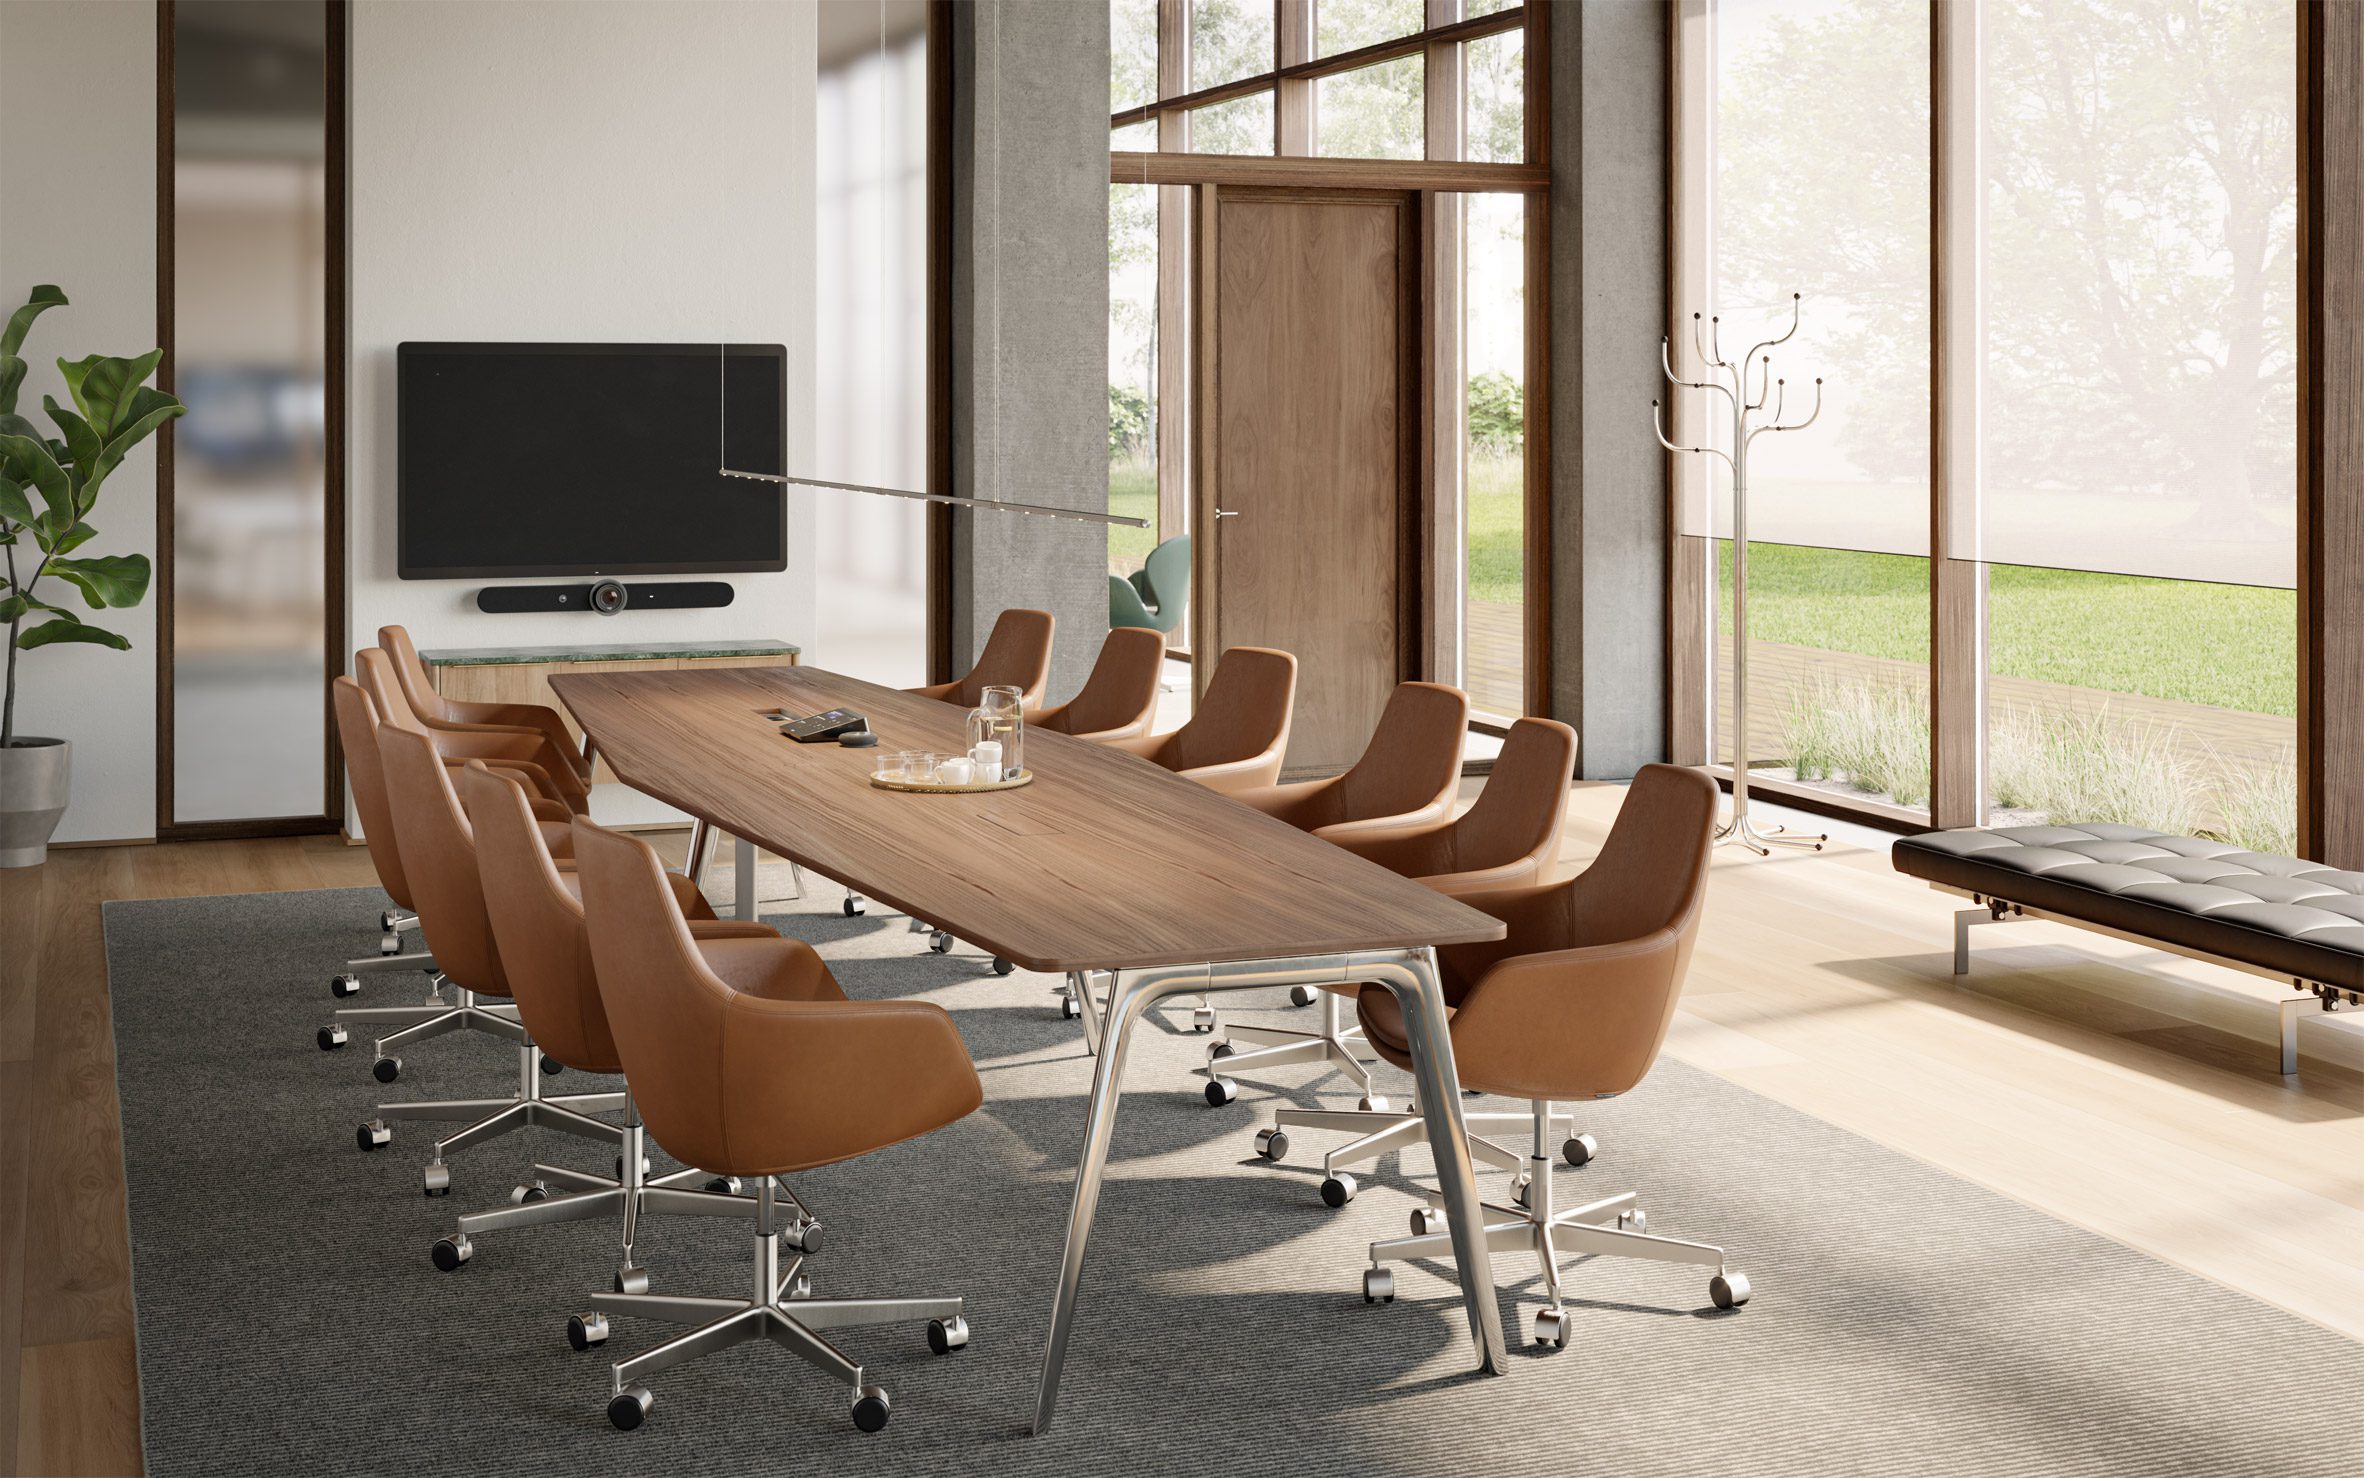 Meeting room with a Pluralis table by Kasper Salto for Fritz Hansen